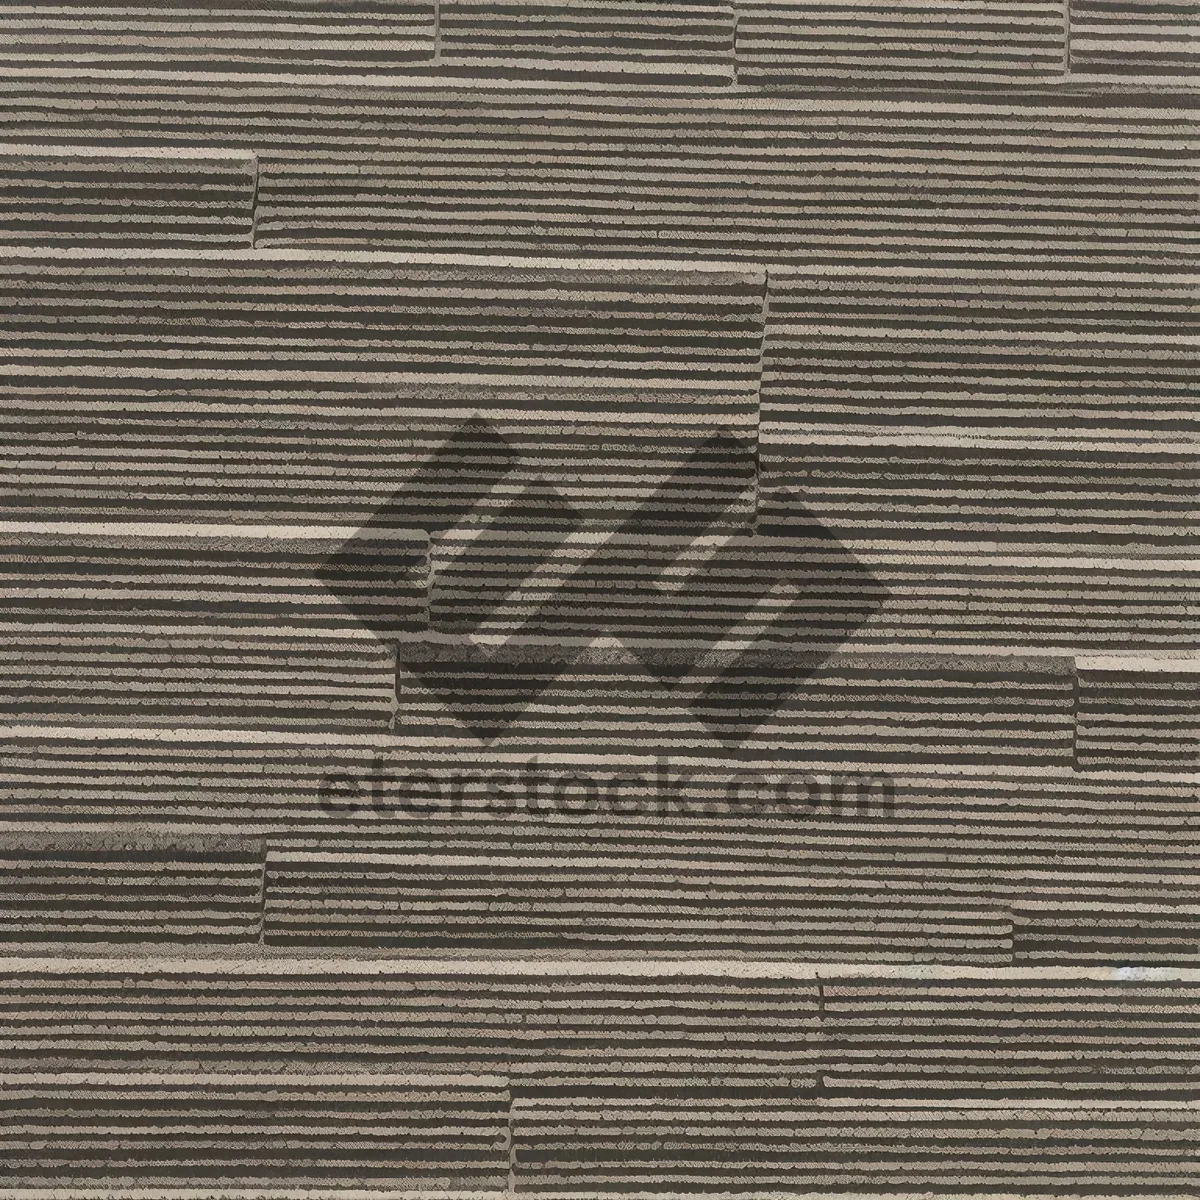 Picture of Textured Grunge Metal Wall Surface - Industrial Design